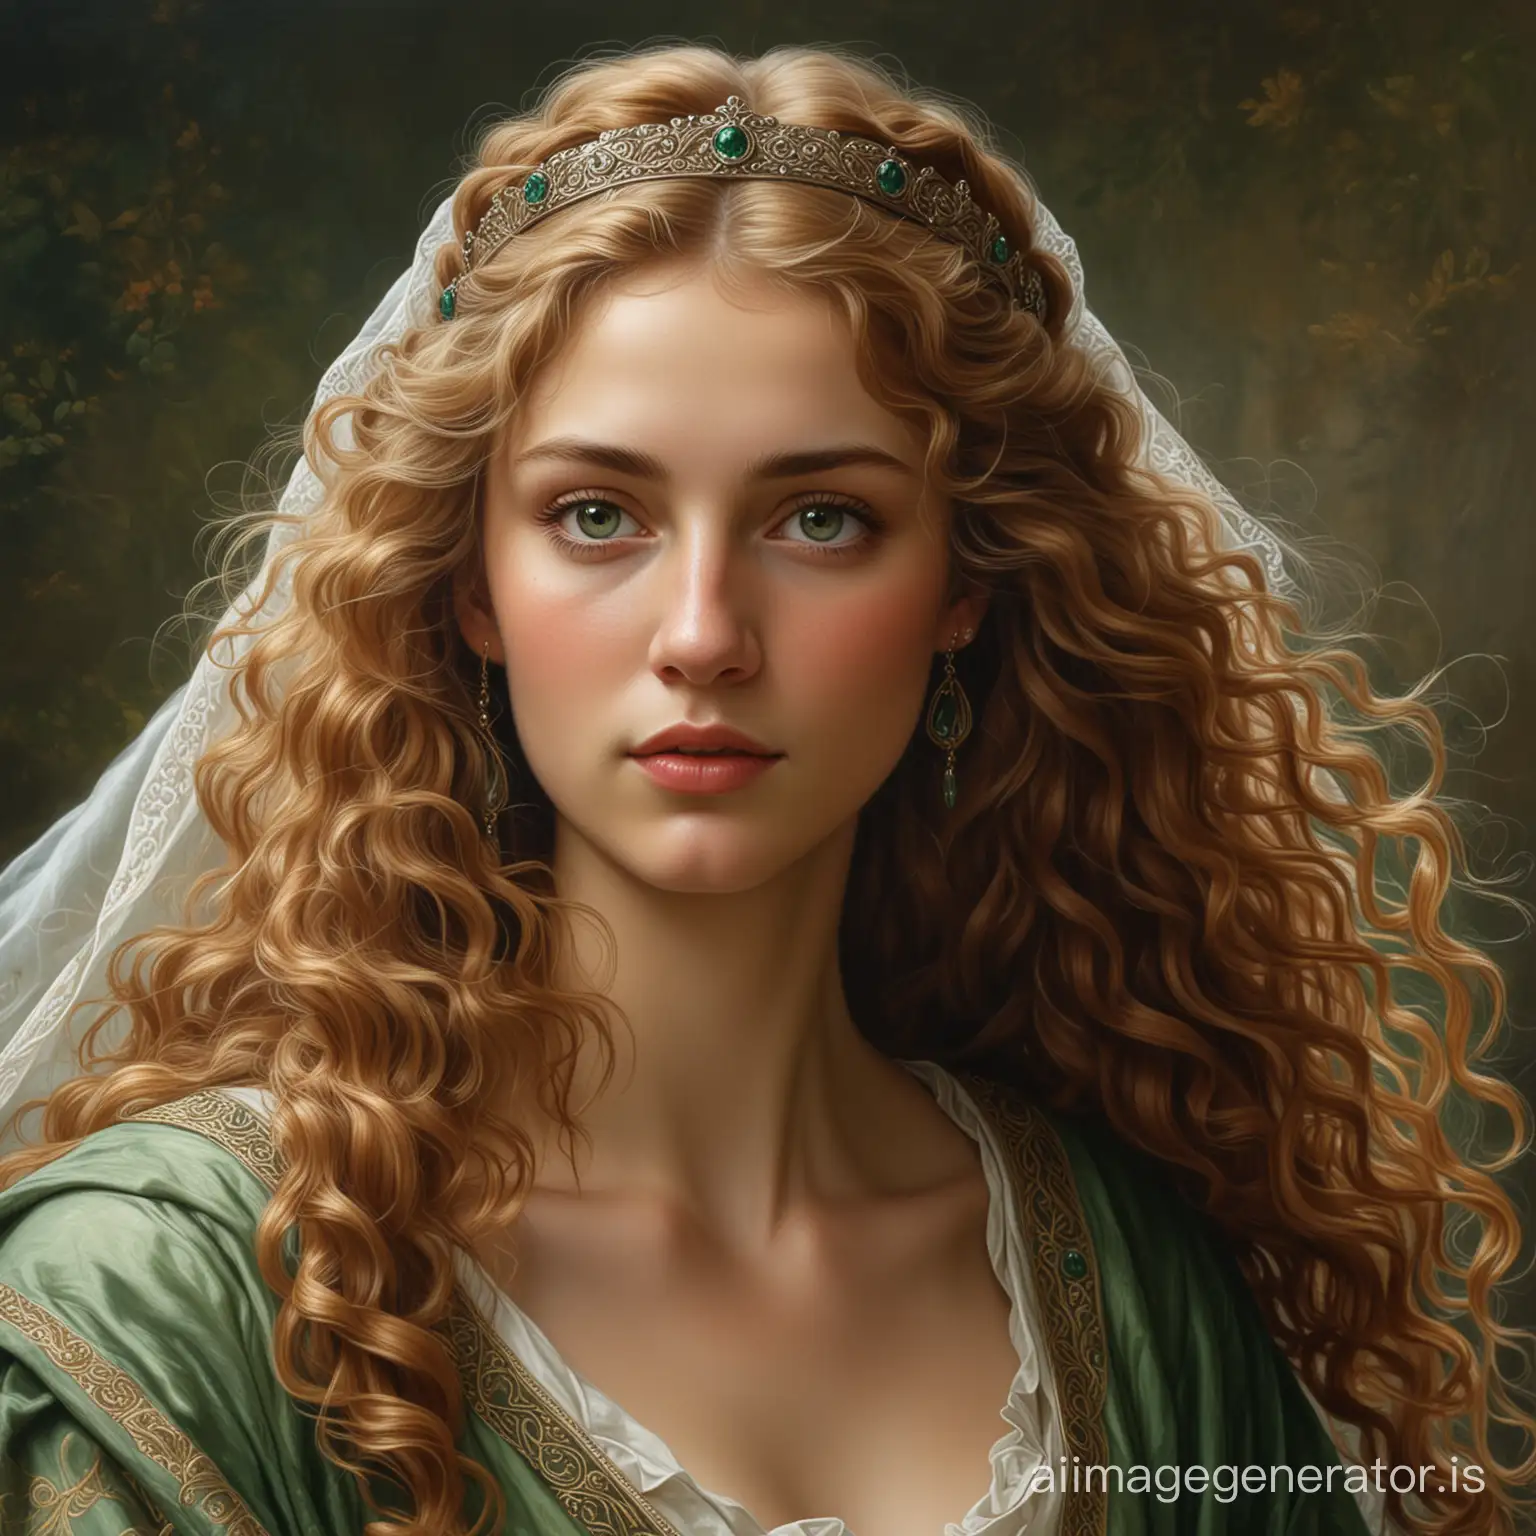 Noble-Roman-Princess-Portrait-with-Veil-Realistic-Oil-Painting-in-PreRaphaelite-Style